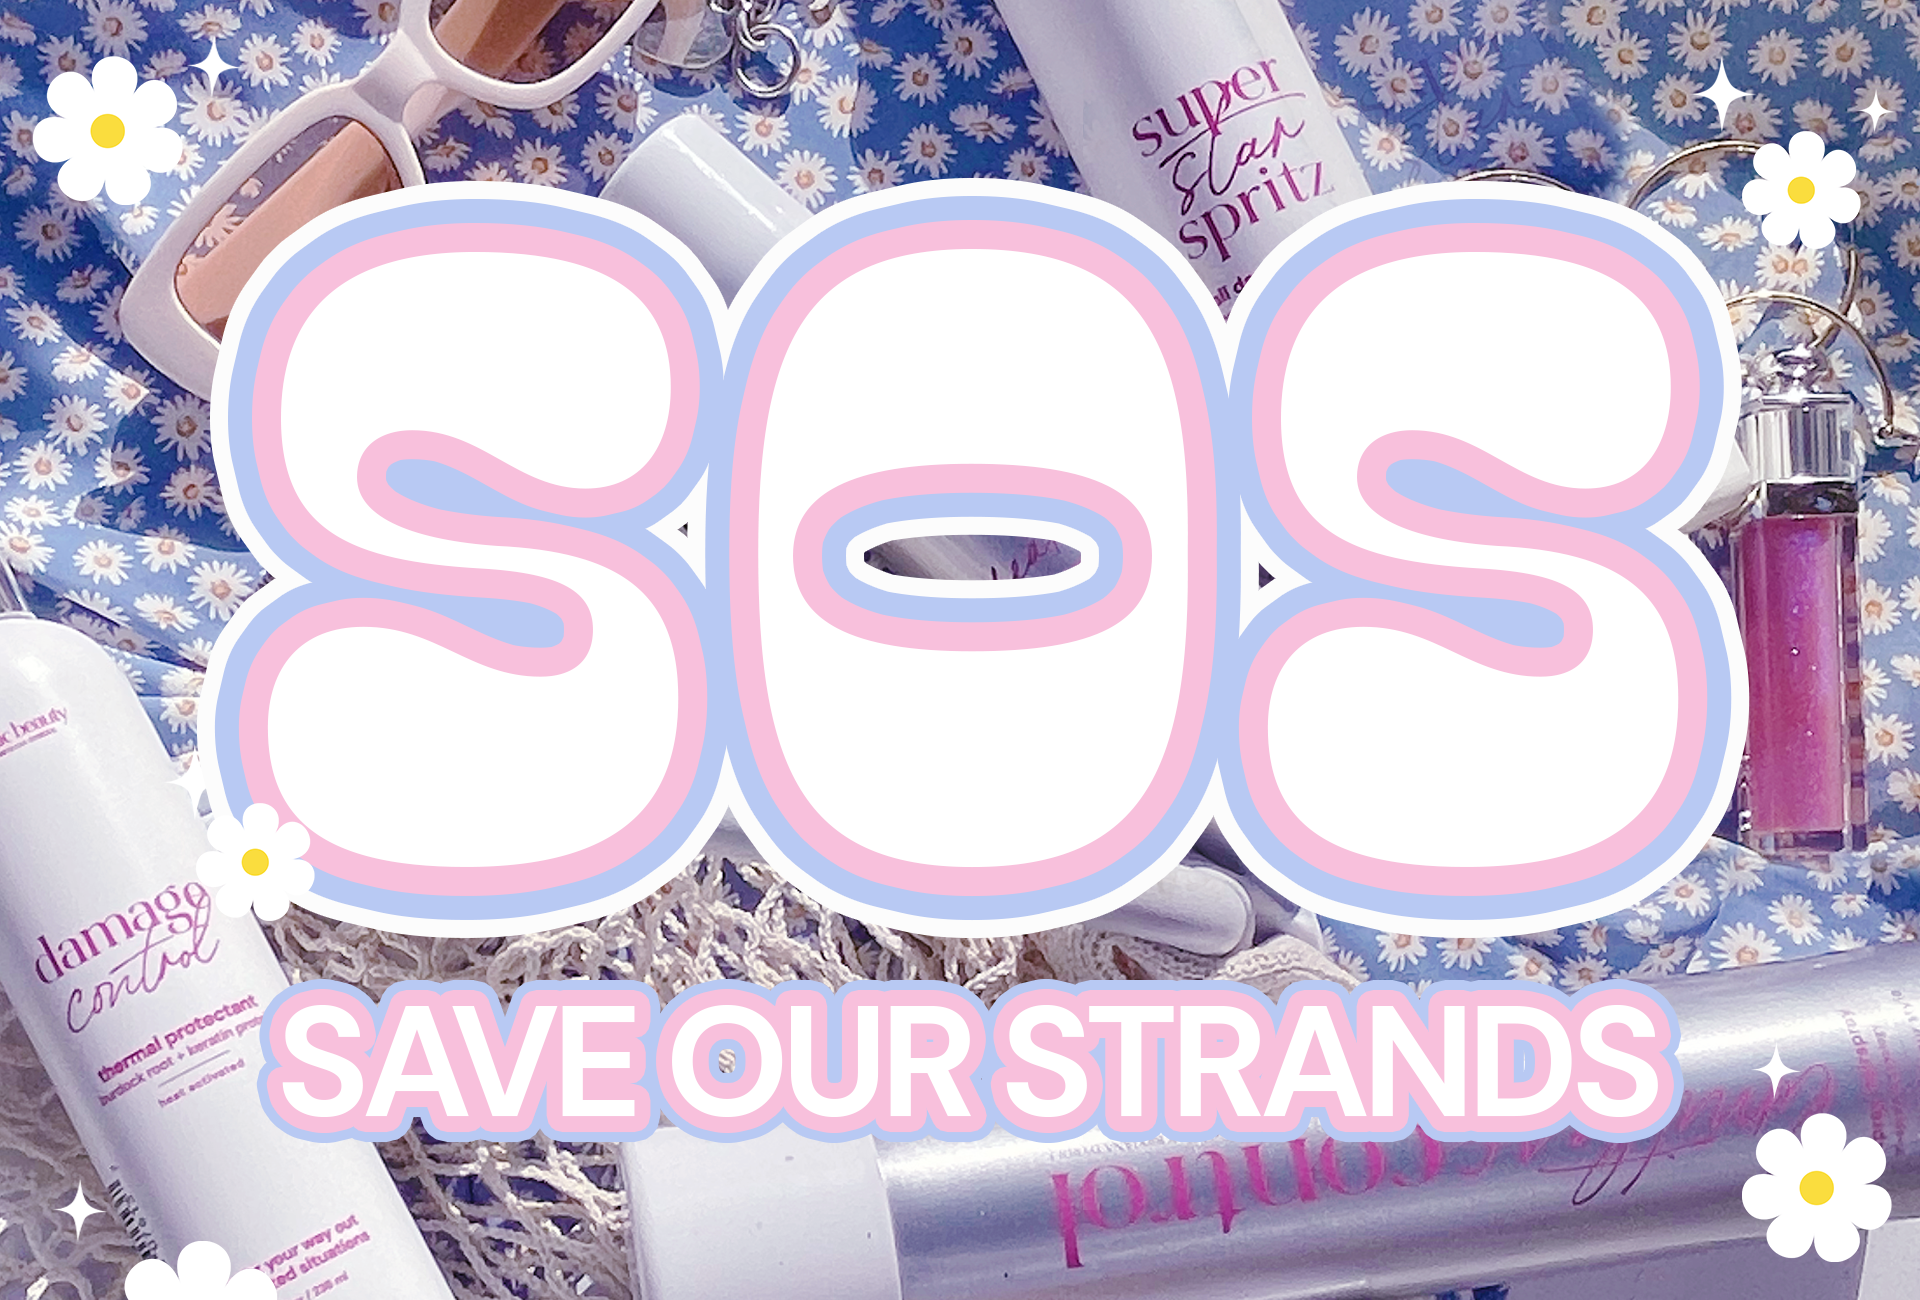 SOS: Save Our Strands